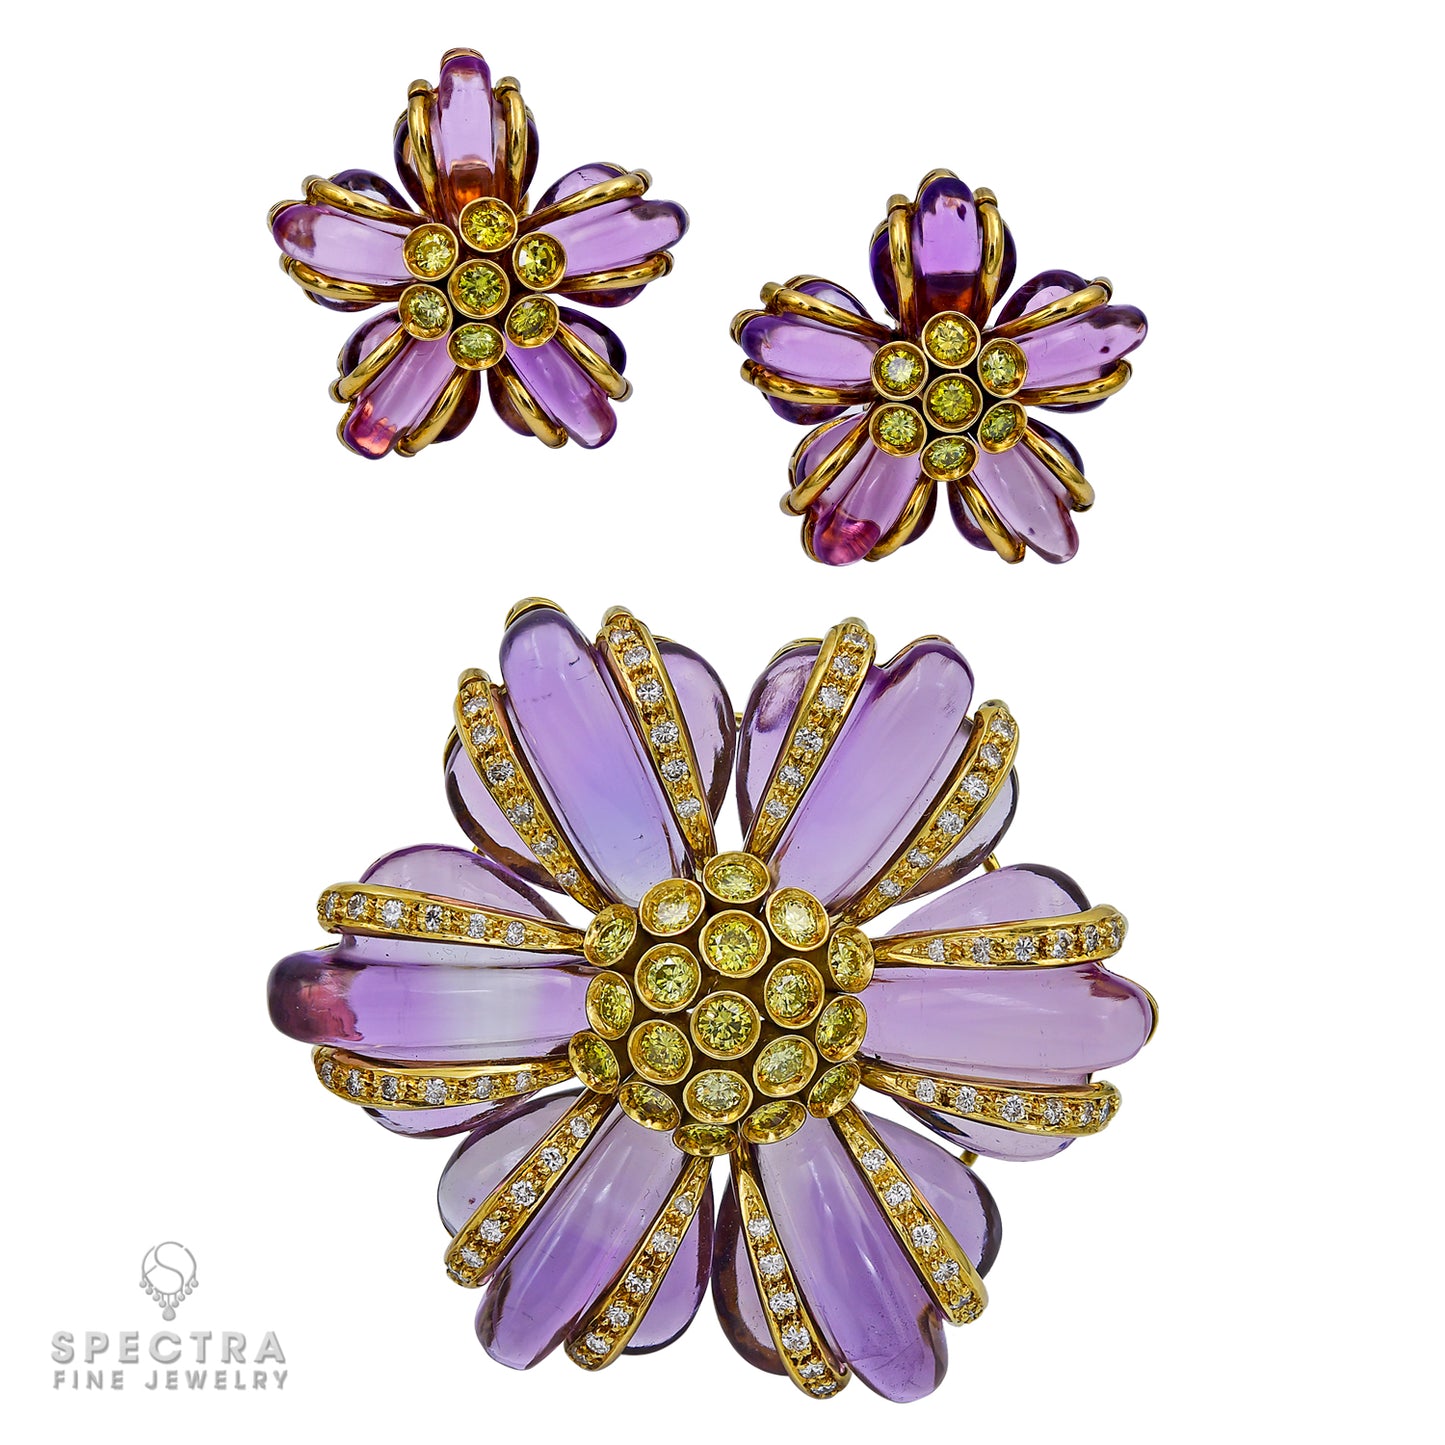 Exquisite Amethyst and Diamond Flower Pendant and Earrings Set in 18k Yellow Gold